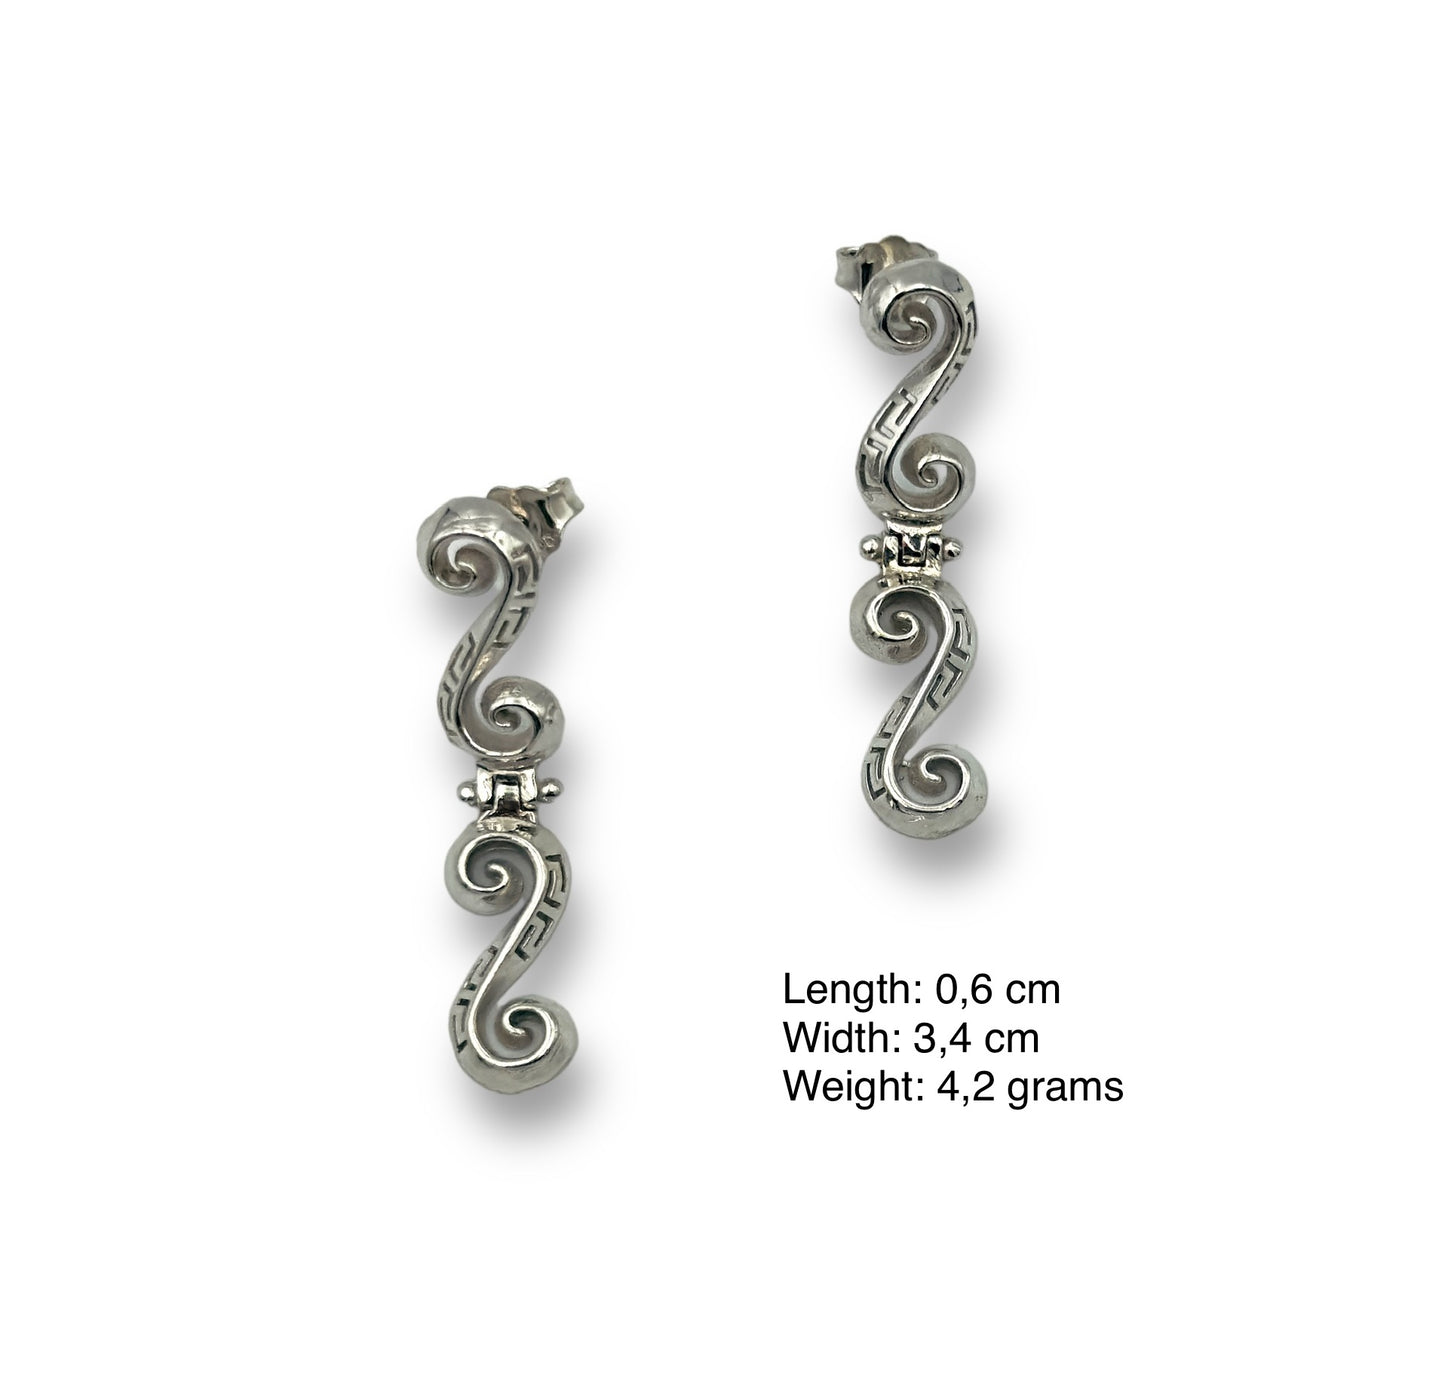 Silver infinity and Meander design earrings